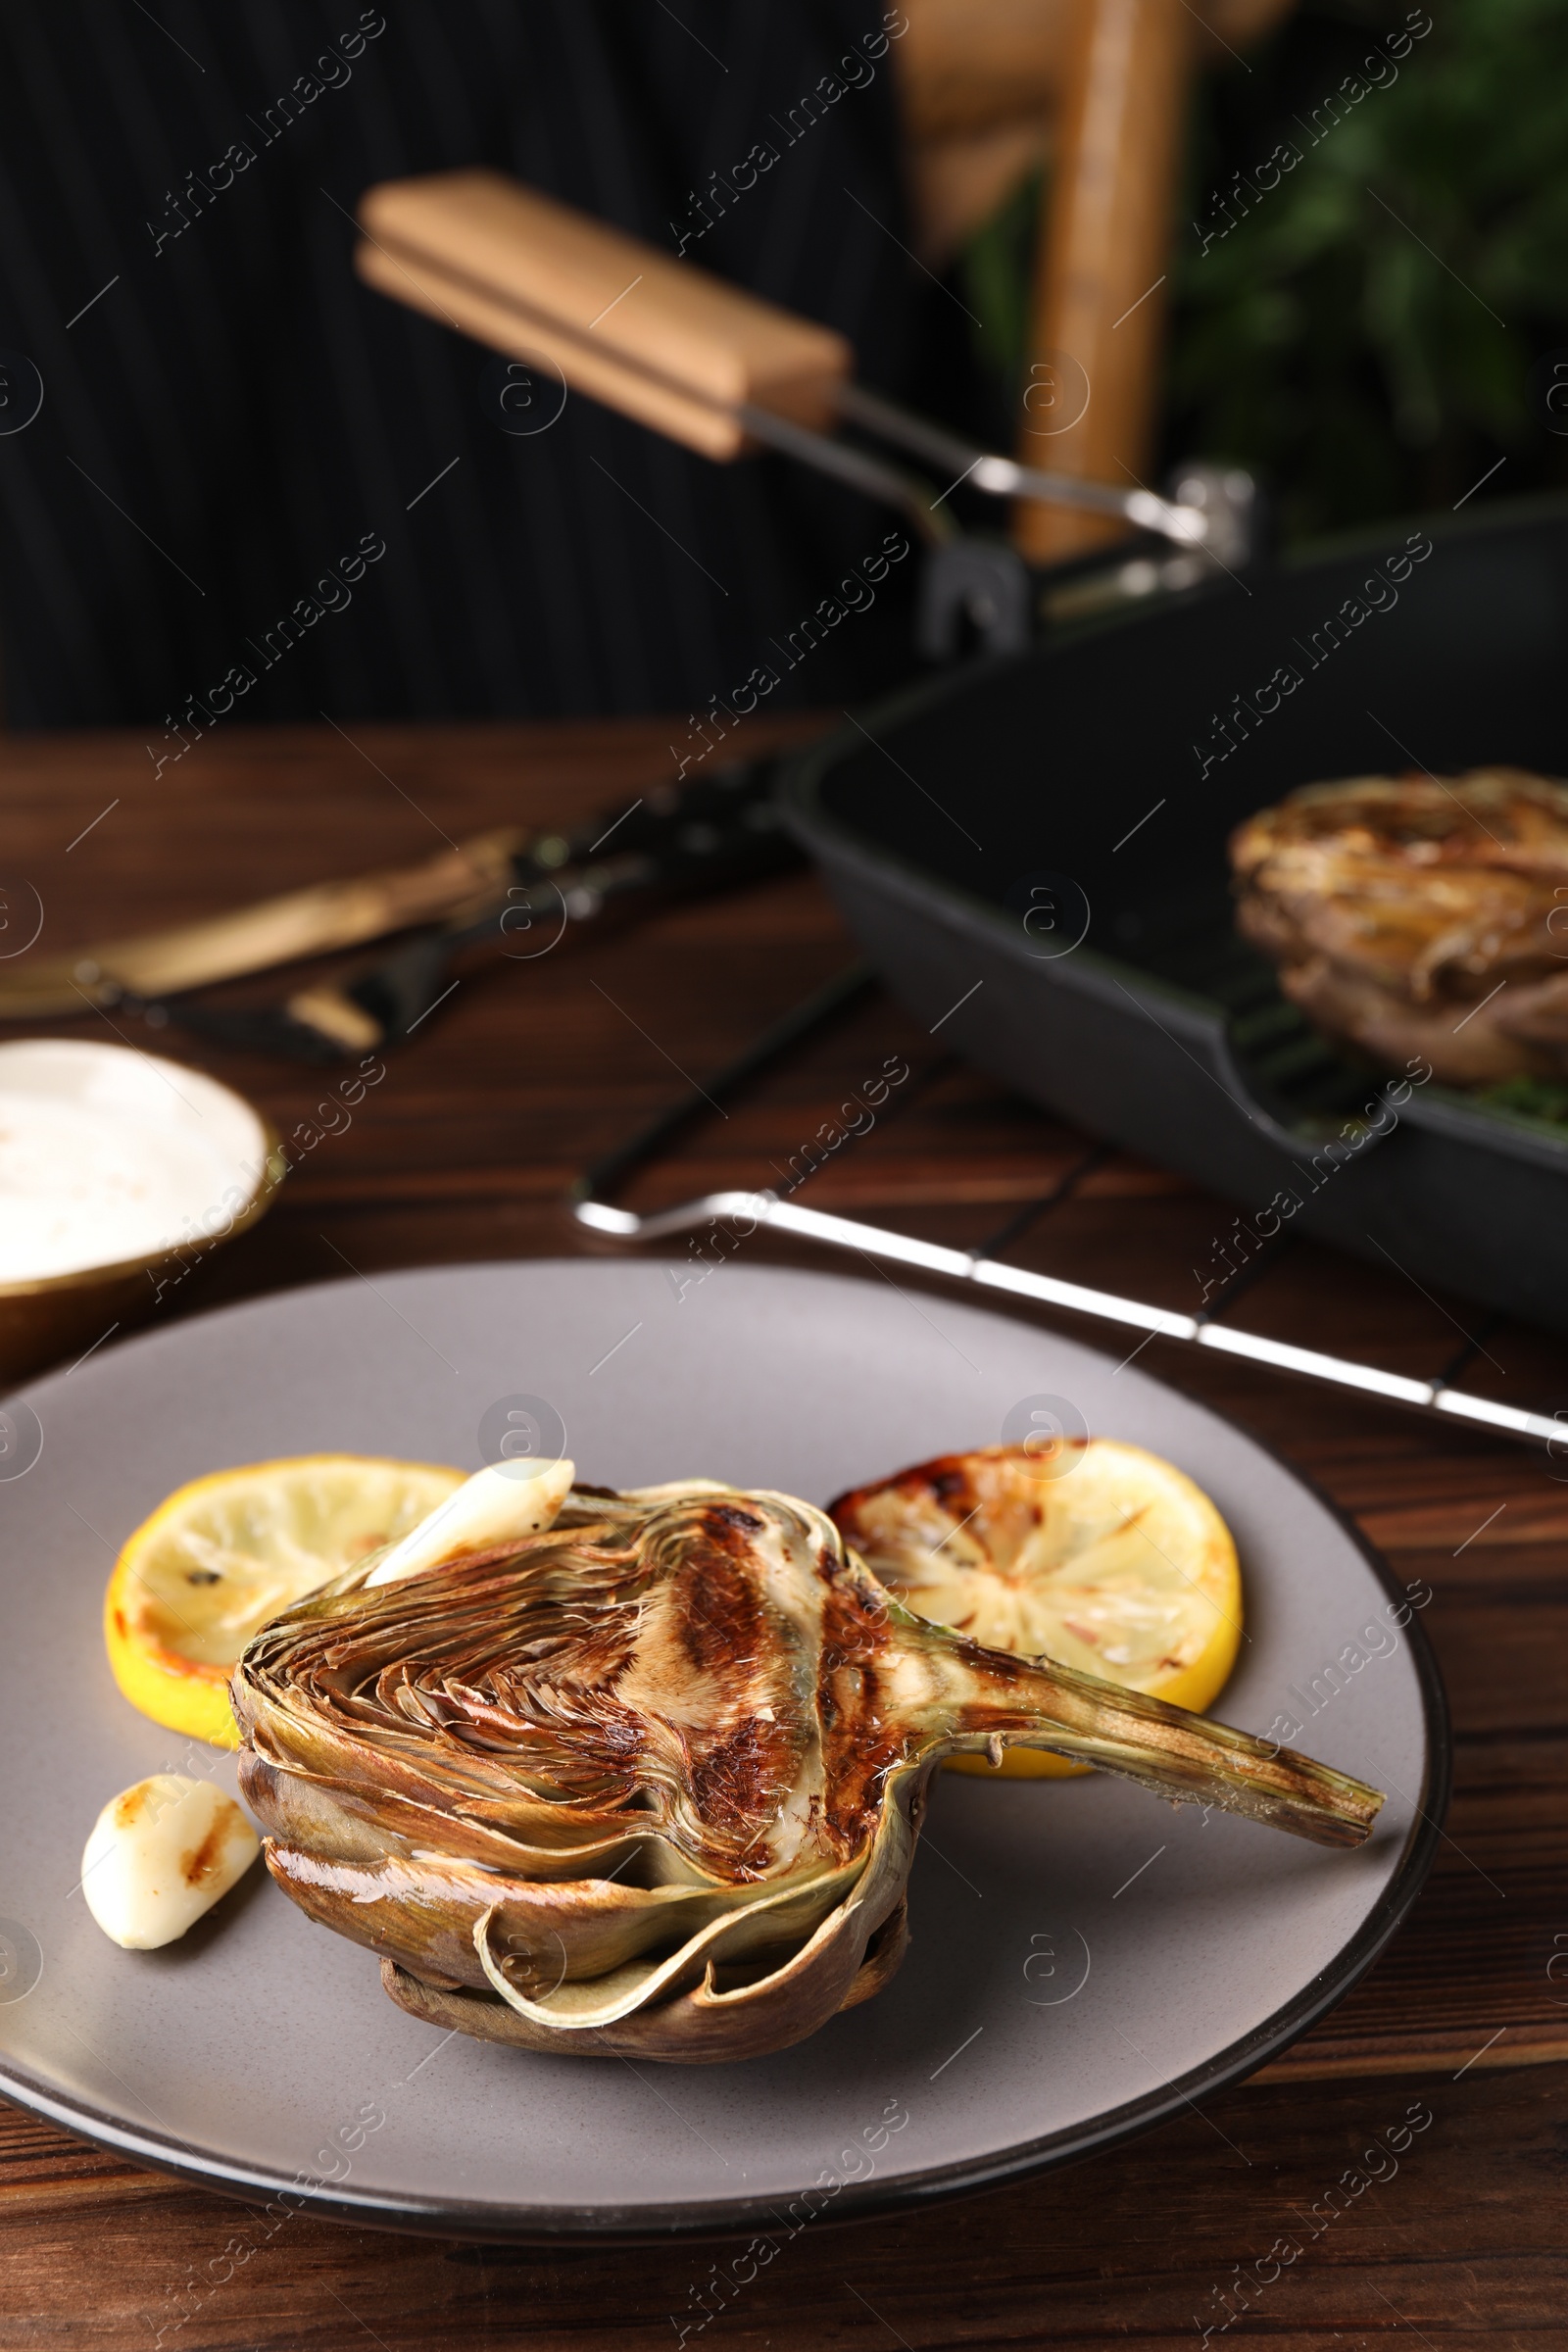 Photo of Tasty grilled artichoke served on wooden table